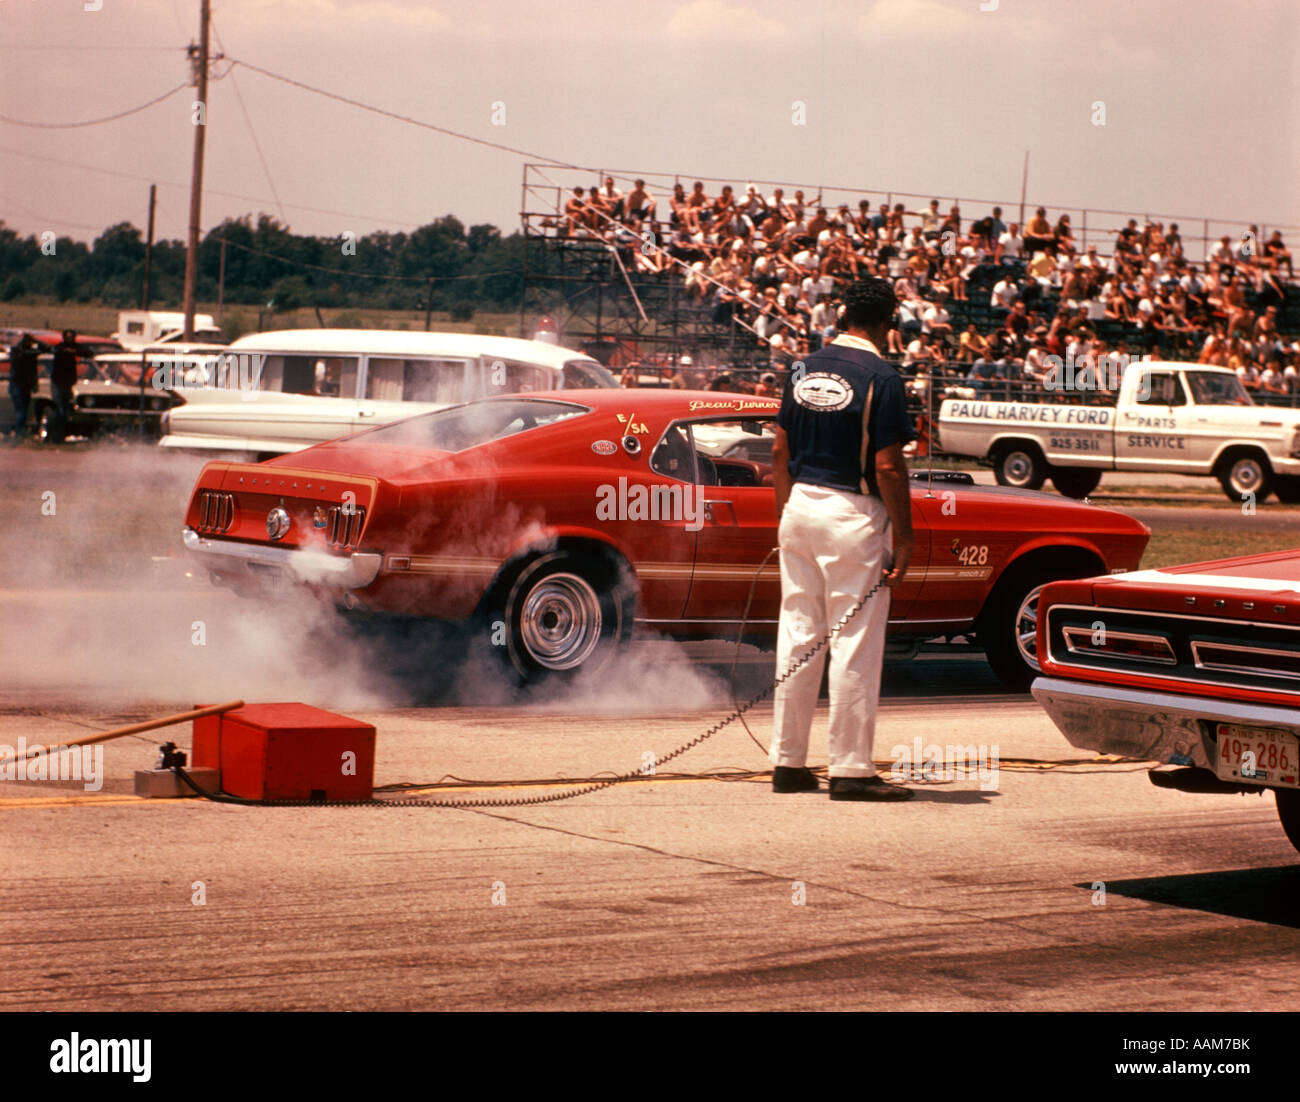 1970 1970s PIT MECHANIC BY RACE CAR BURNING RUBBER DRAG RACING BROWNSVILLE INDIANA SPEED MECHANIC CARS Stock Photo